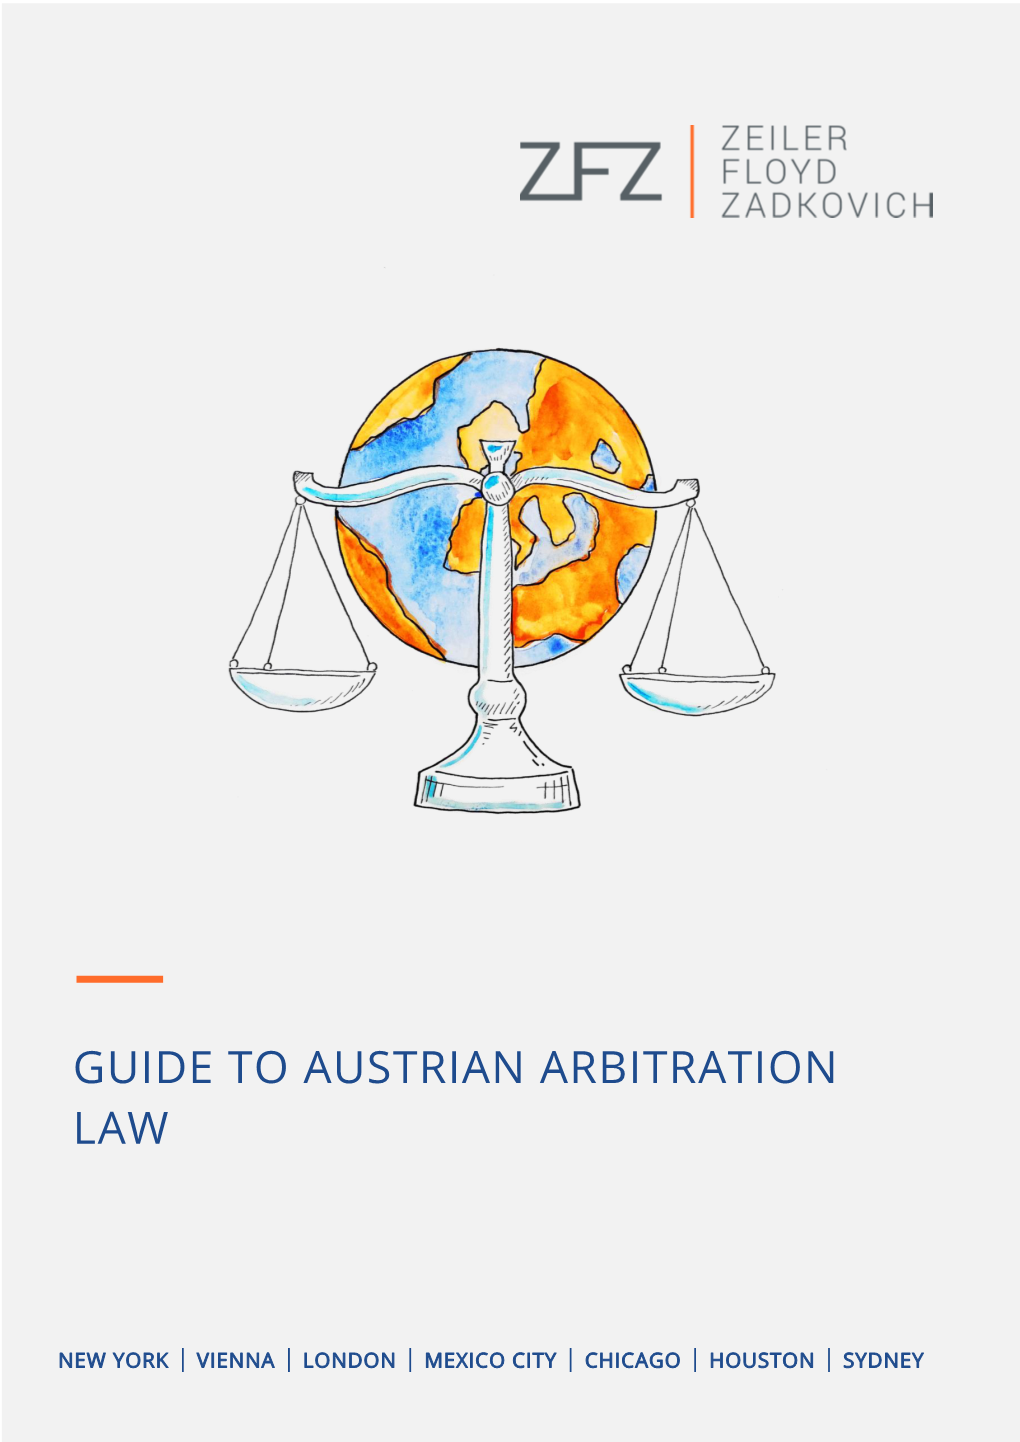 Guide to Austrian Arbitration Law